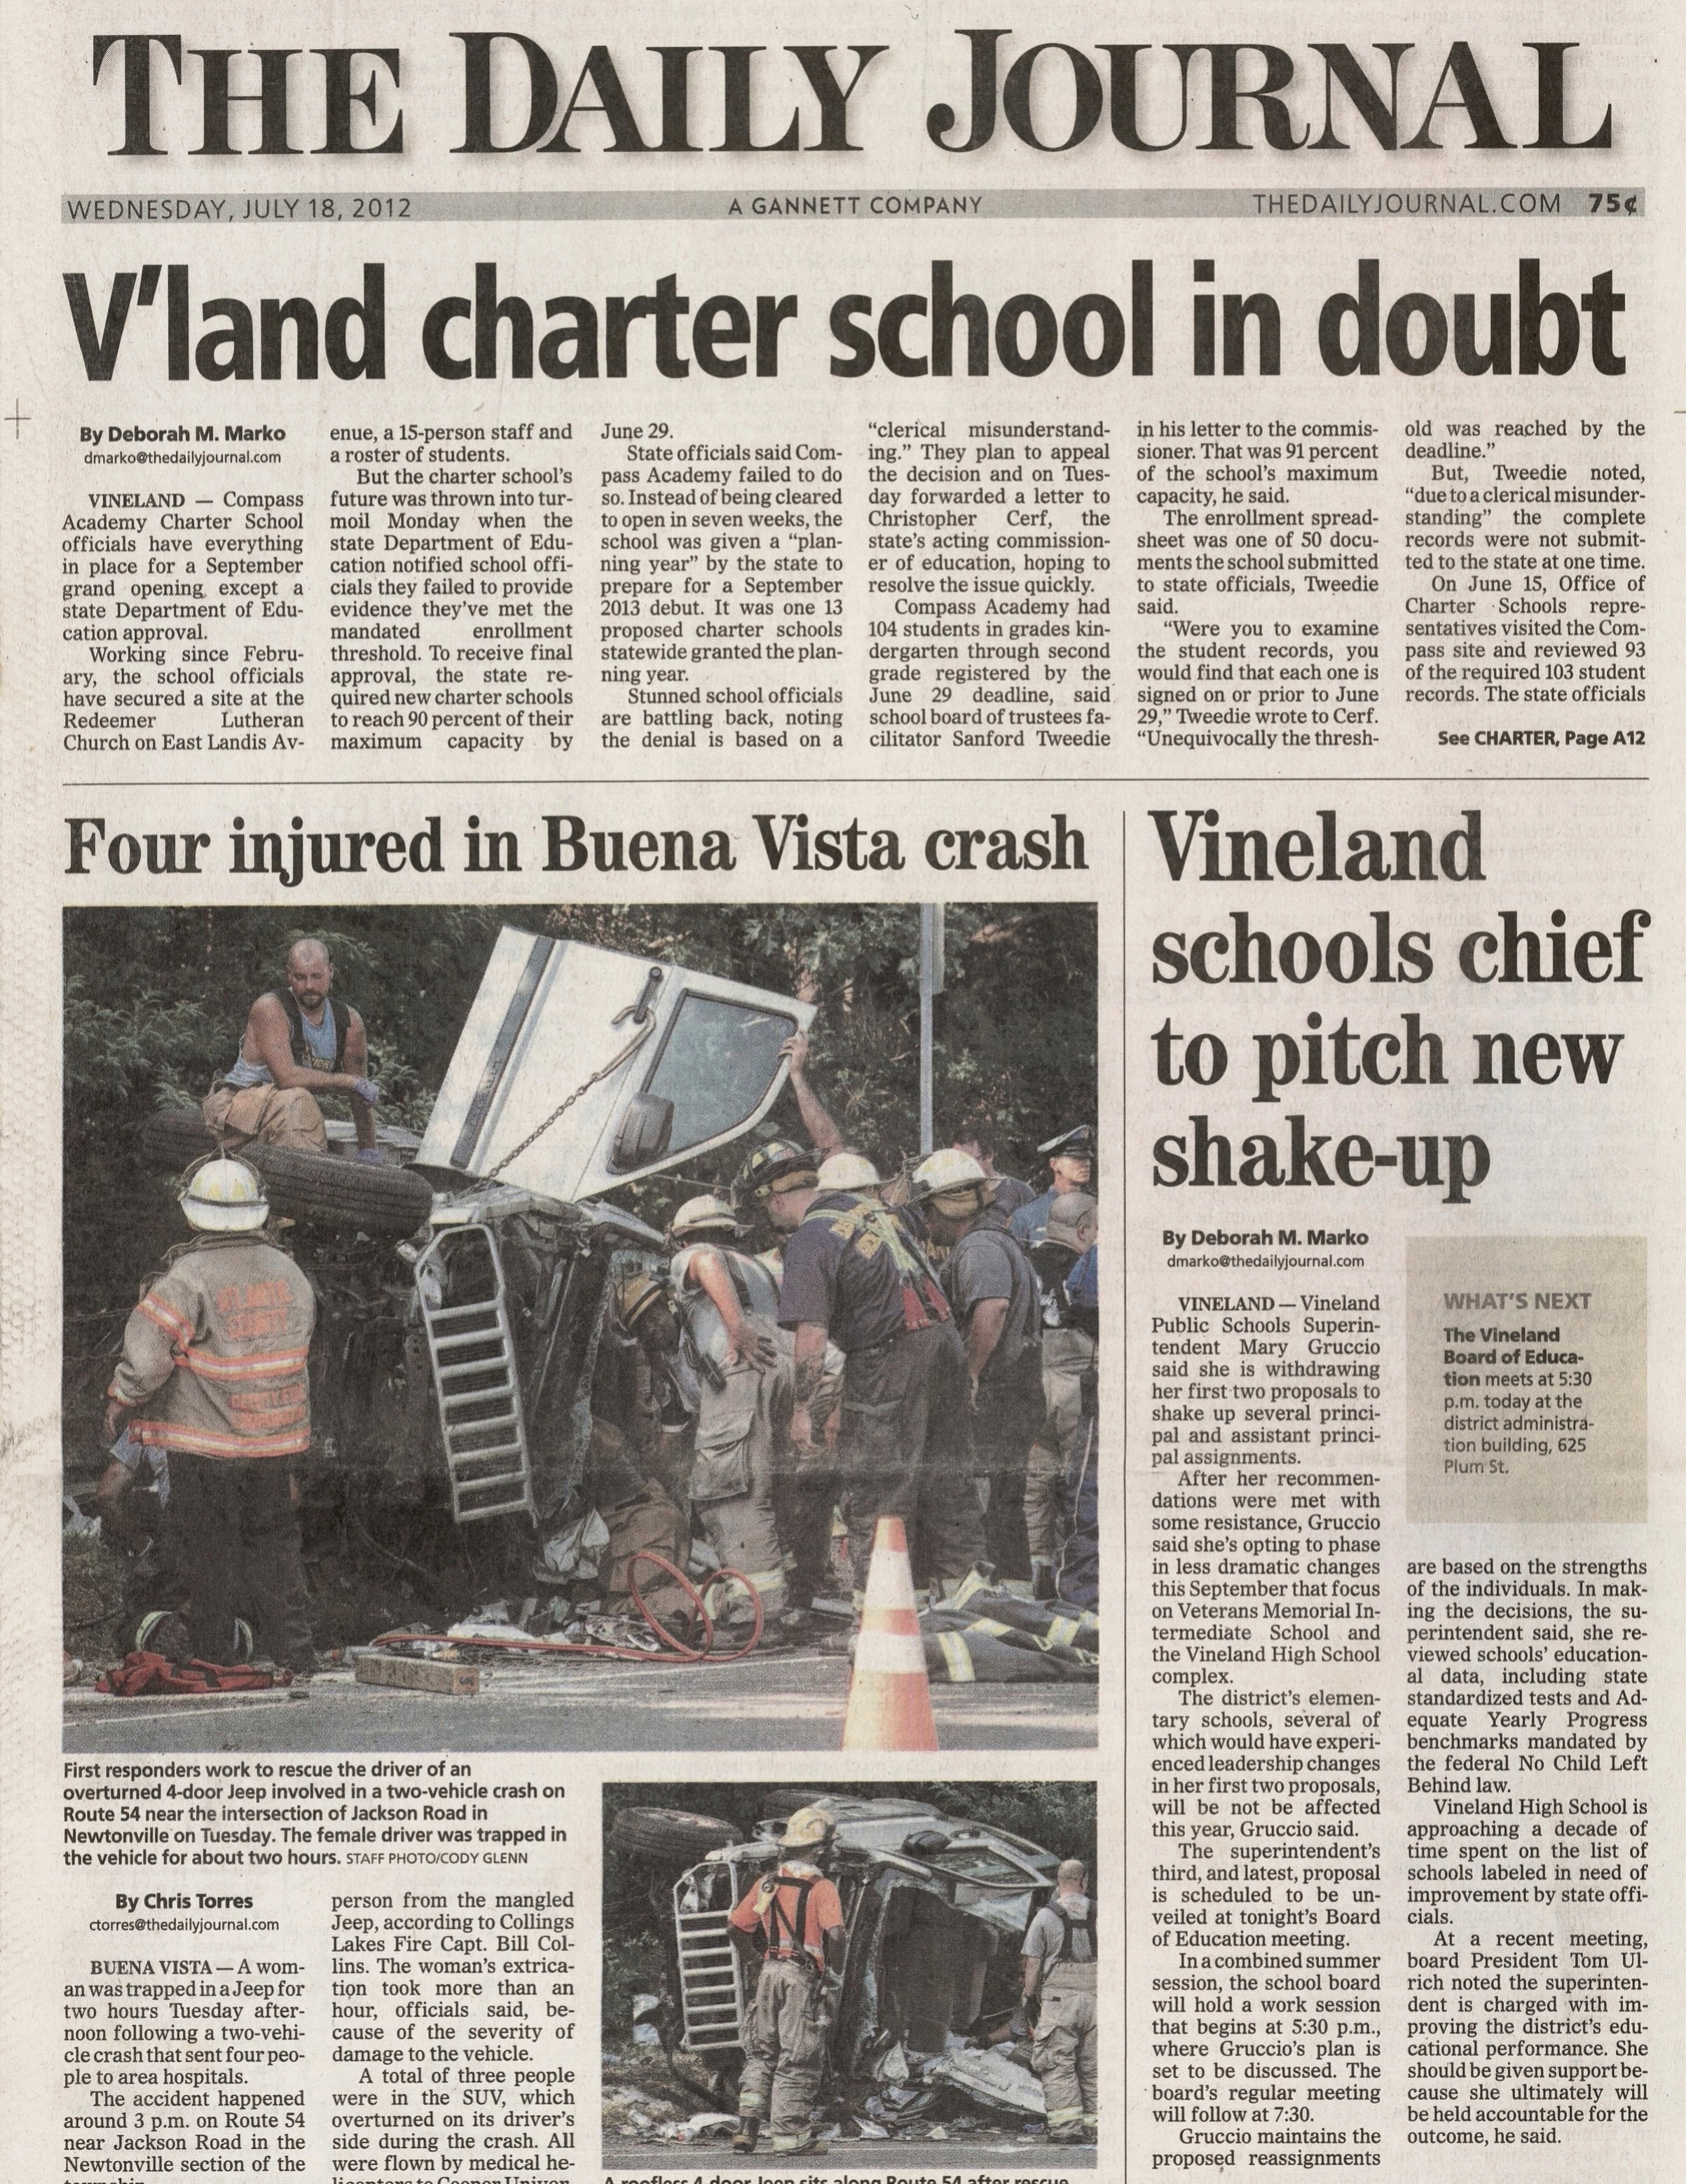  Car crash injures four in Buena Vista July 18 2012 /  The Daily Journal  